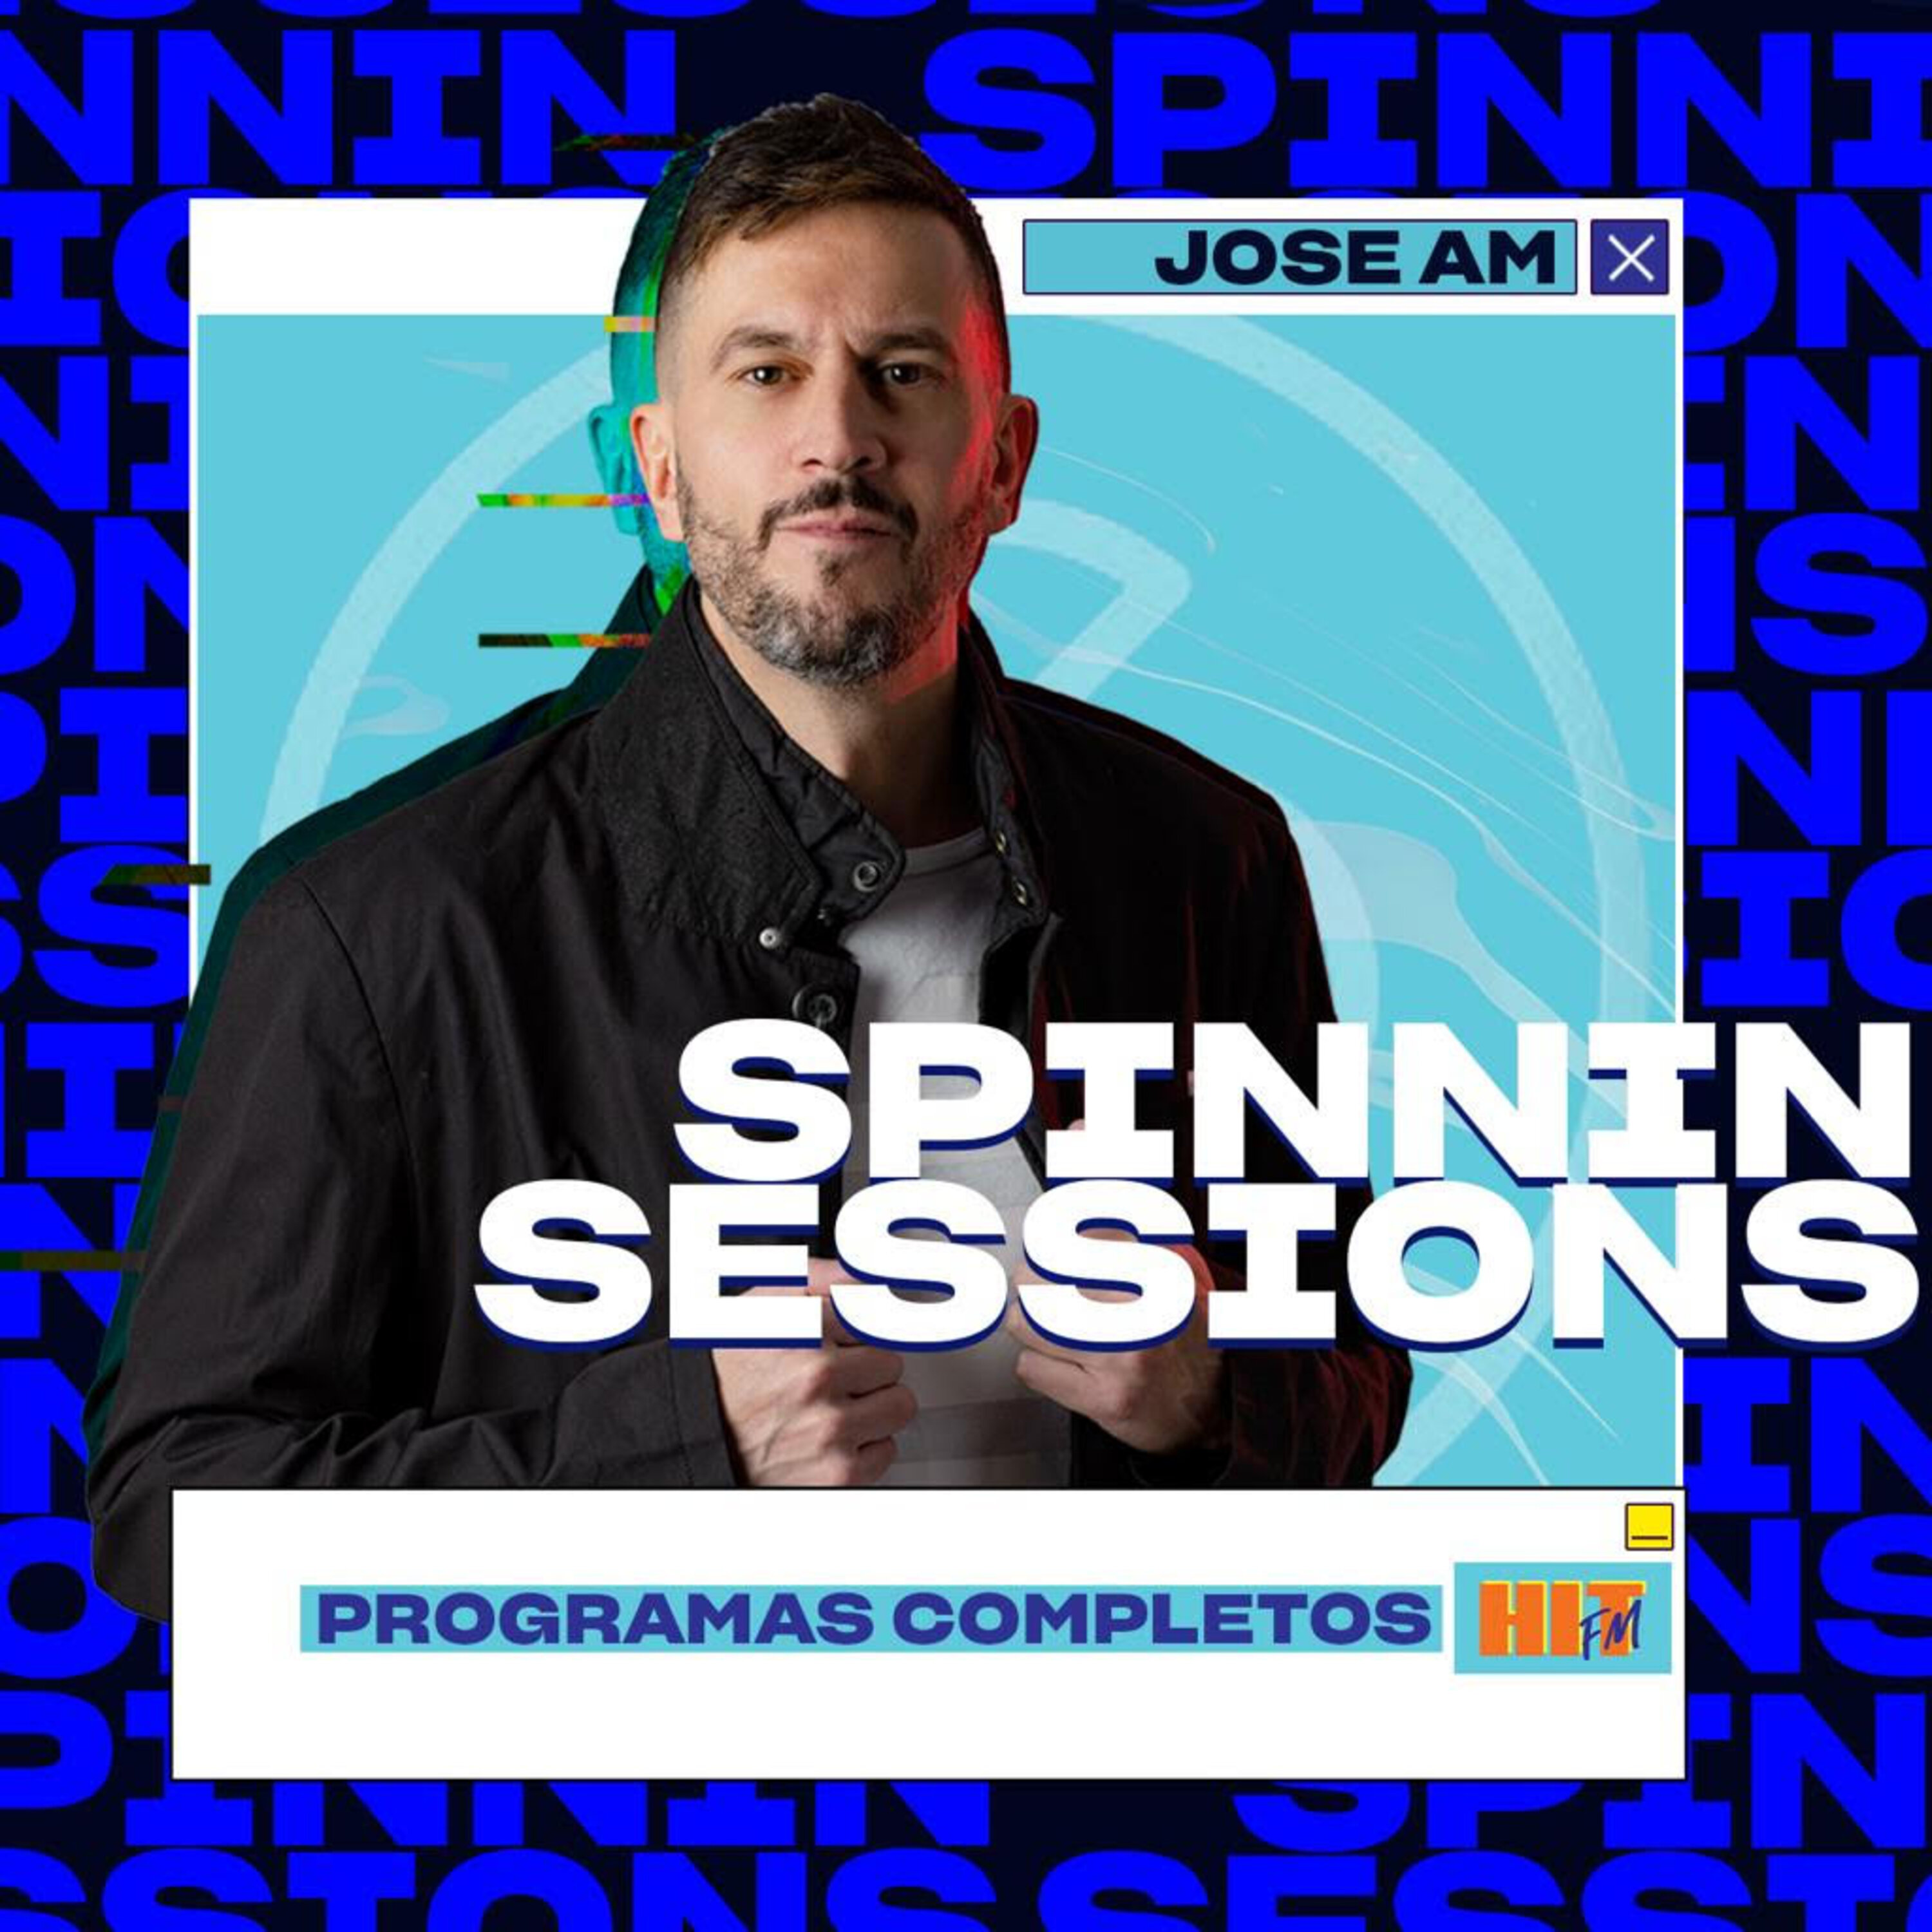 Spinnin Sessions con Jose AM (31/07/2022)